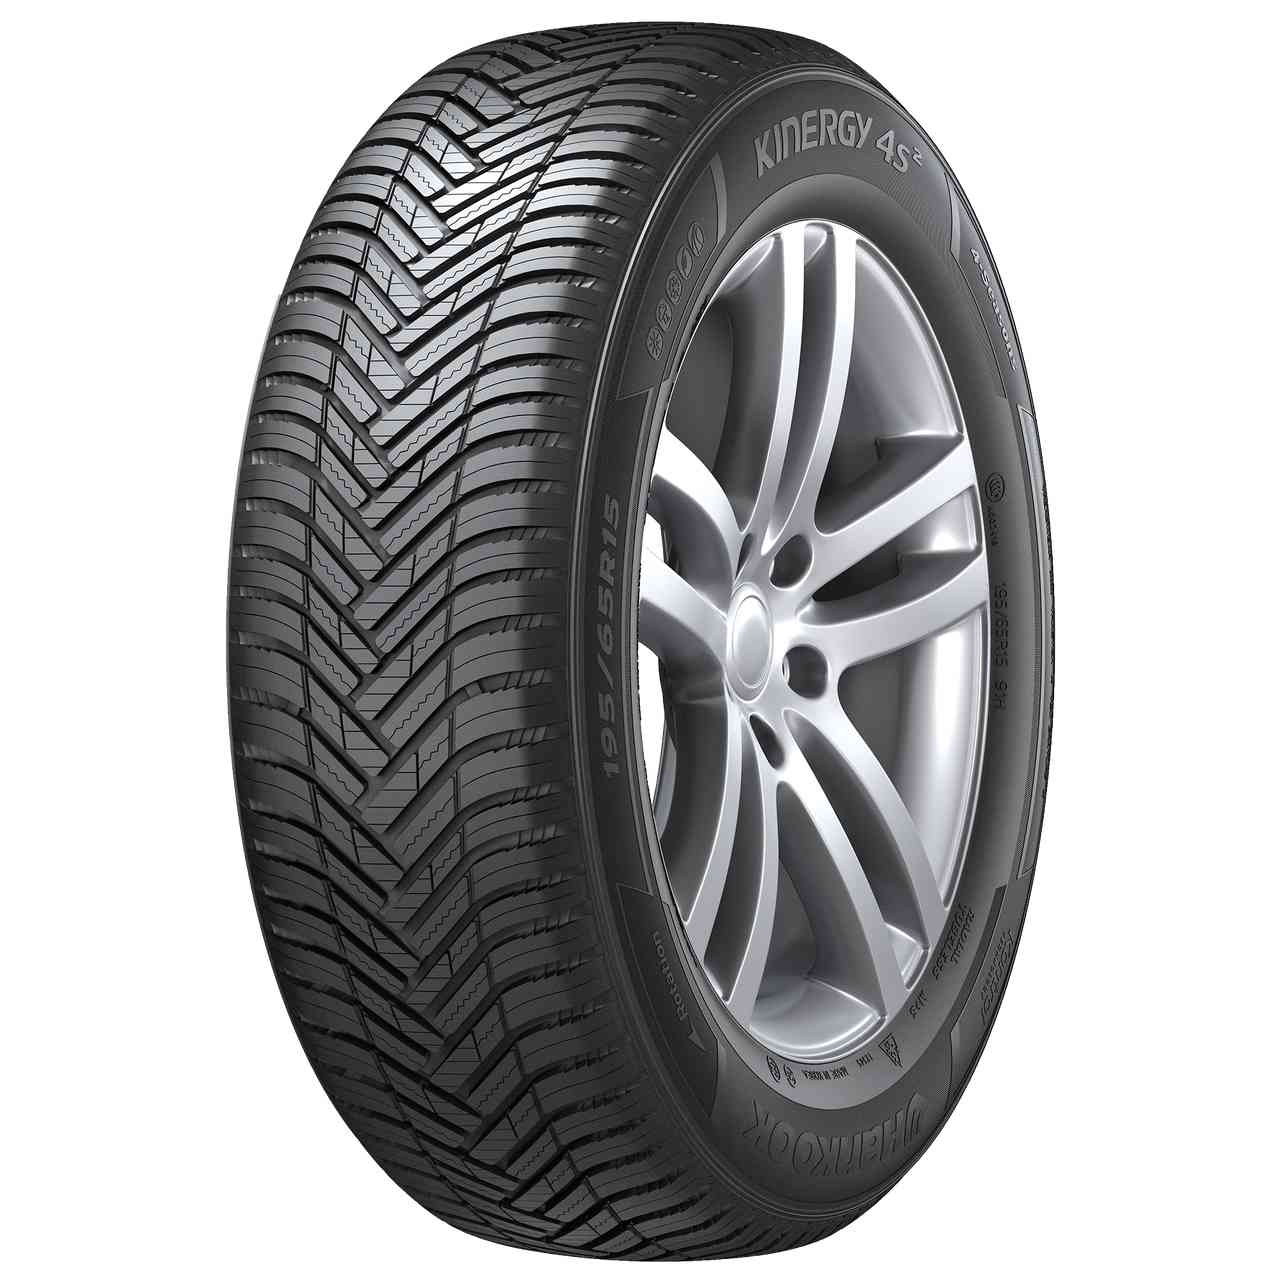 HANKOOK KINERGY 4S 2 (H750) 225/60R18 100H BSW